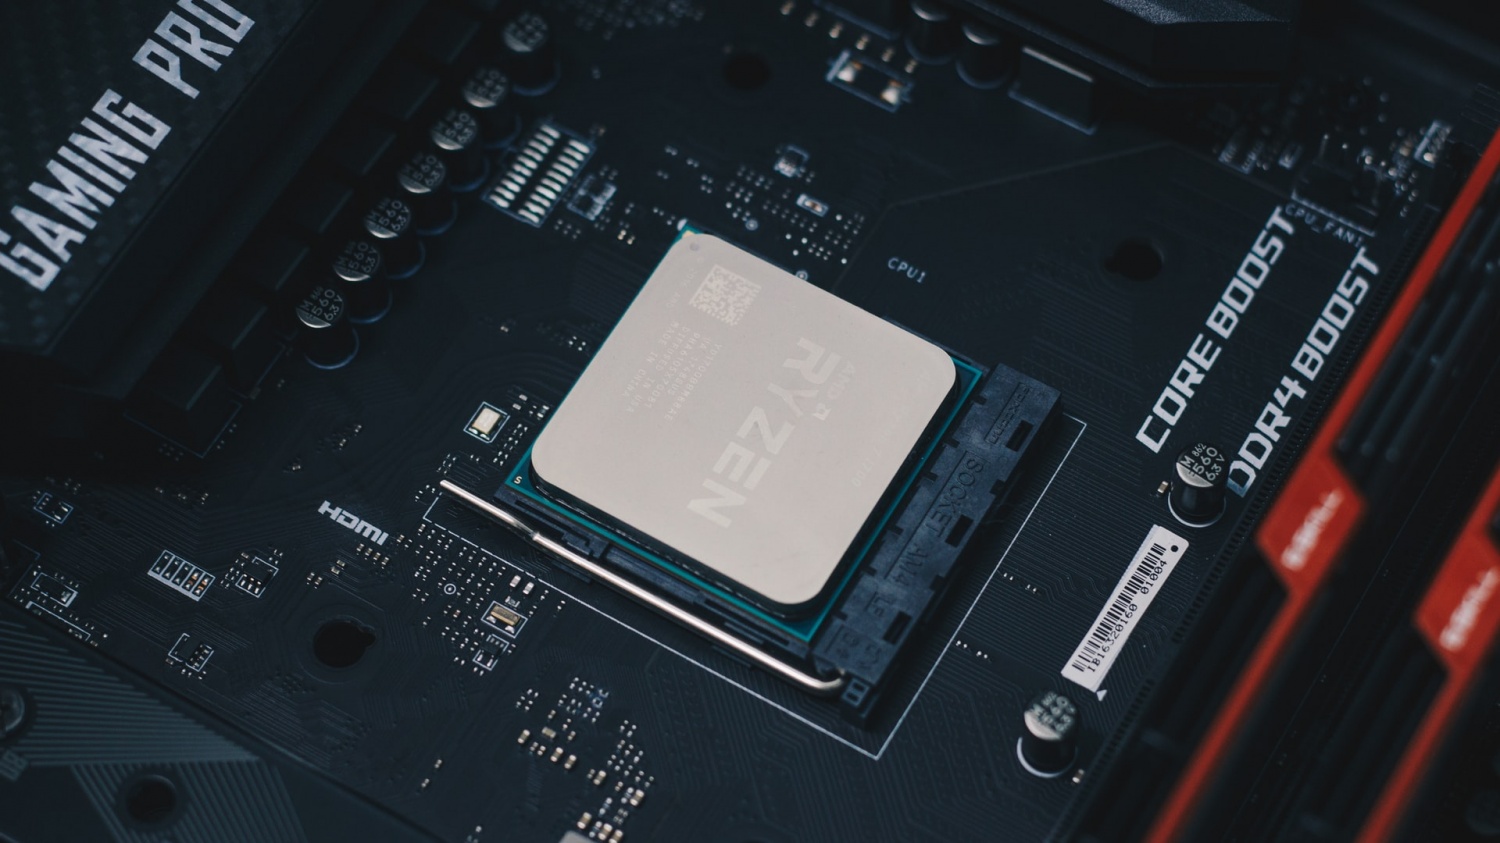 AMD Ryzen 5000 CPUs will Awesomely Come with a Copy of Far Cry 6 for Free